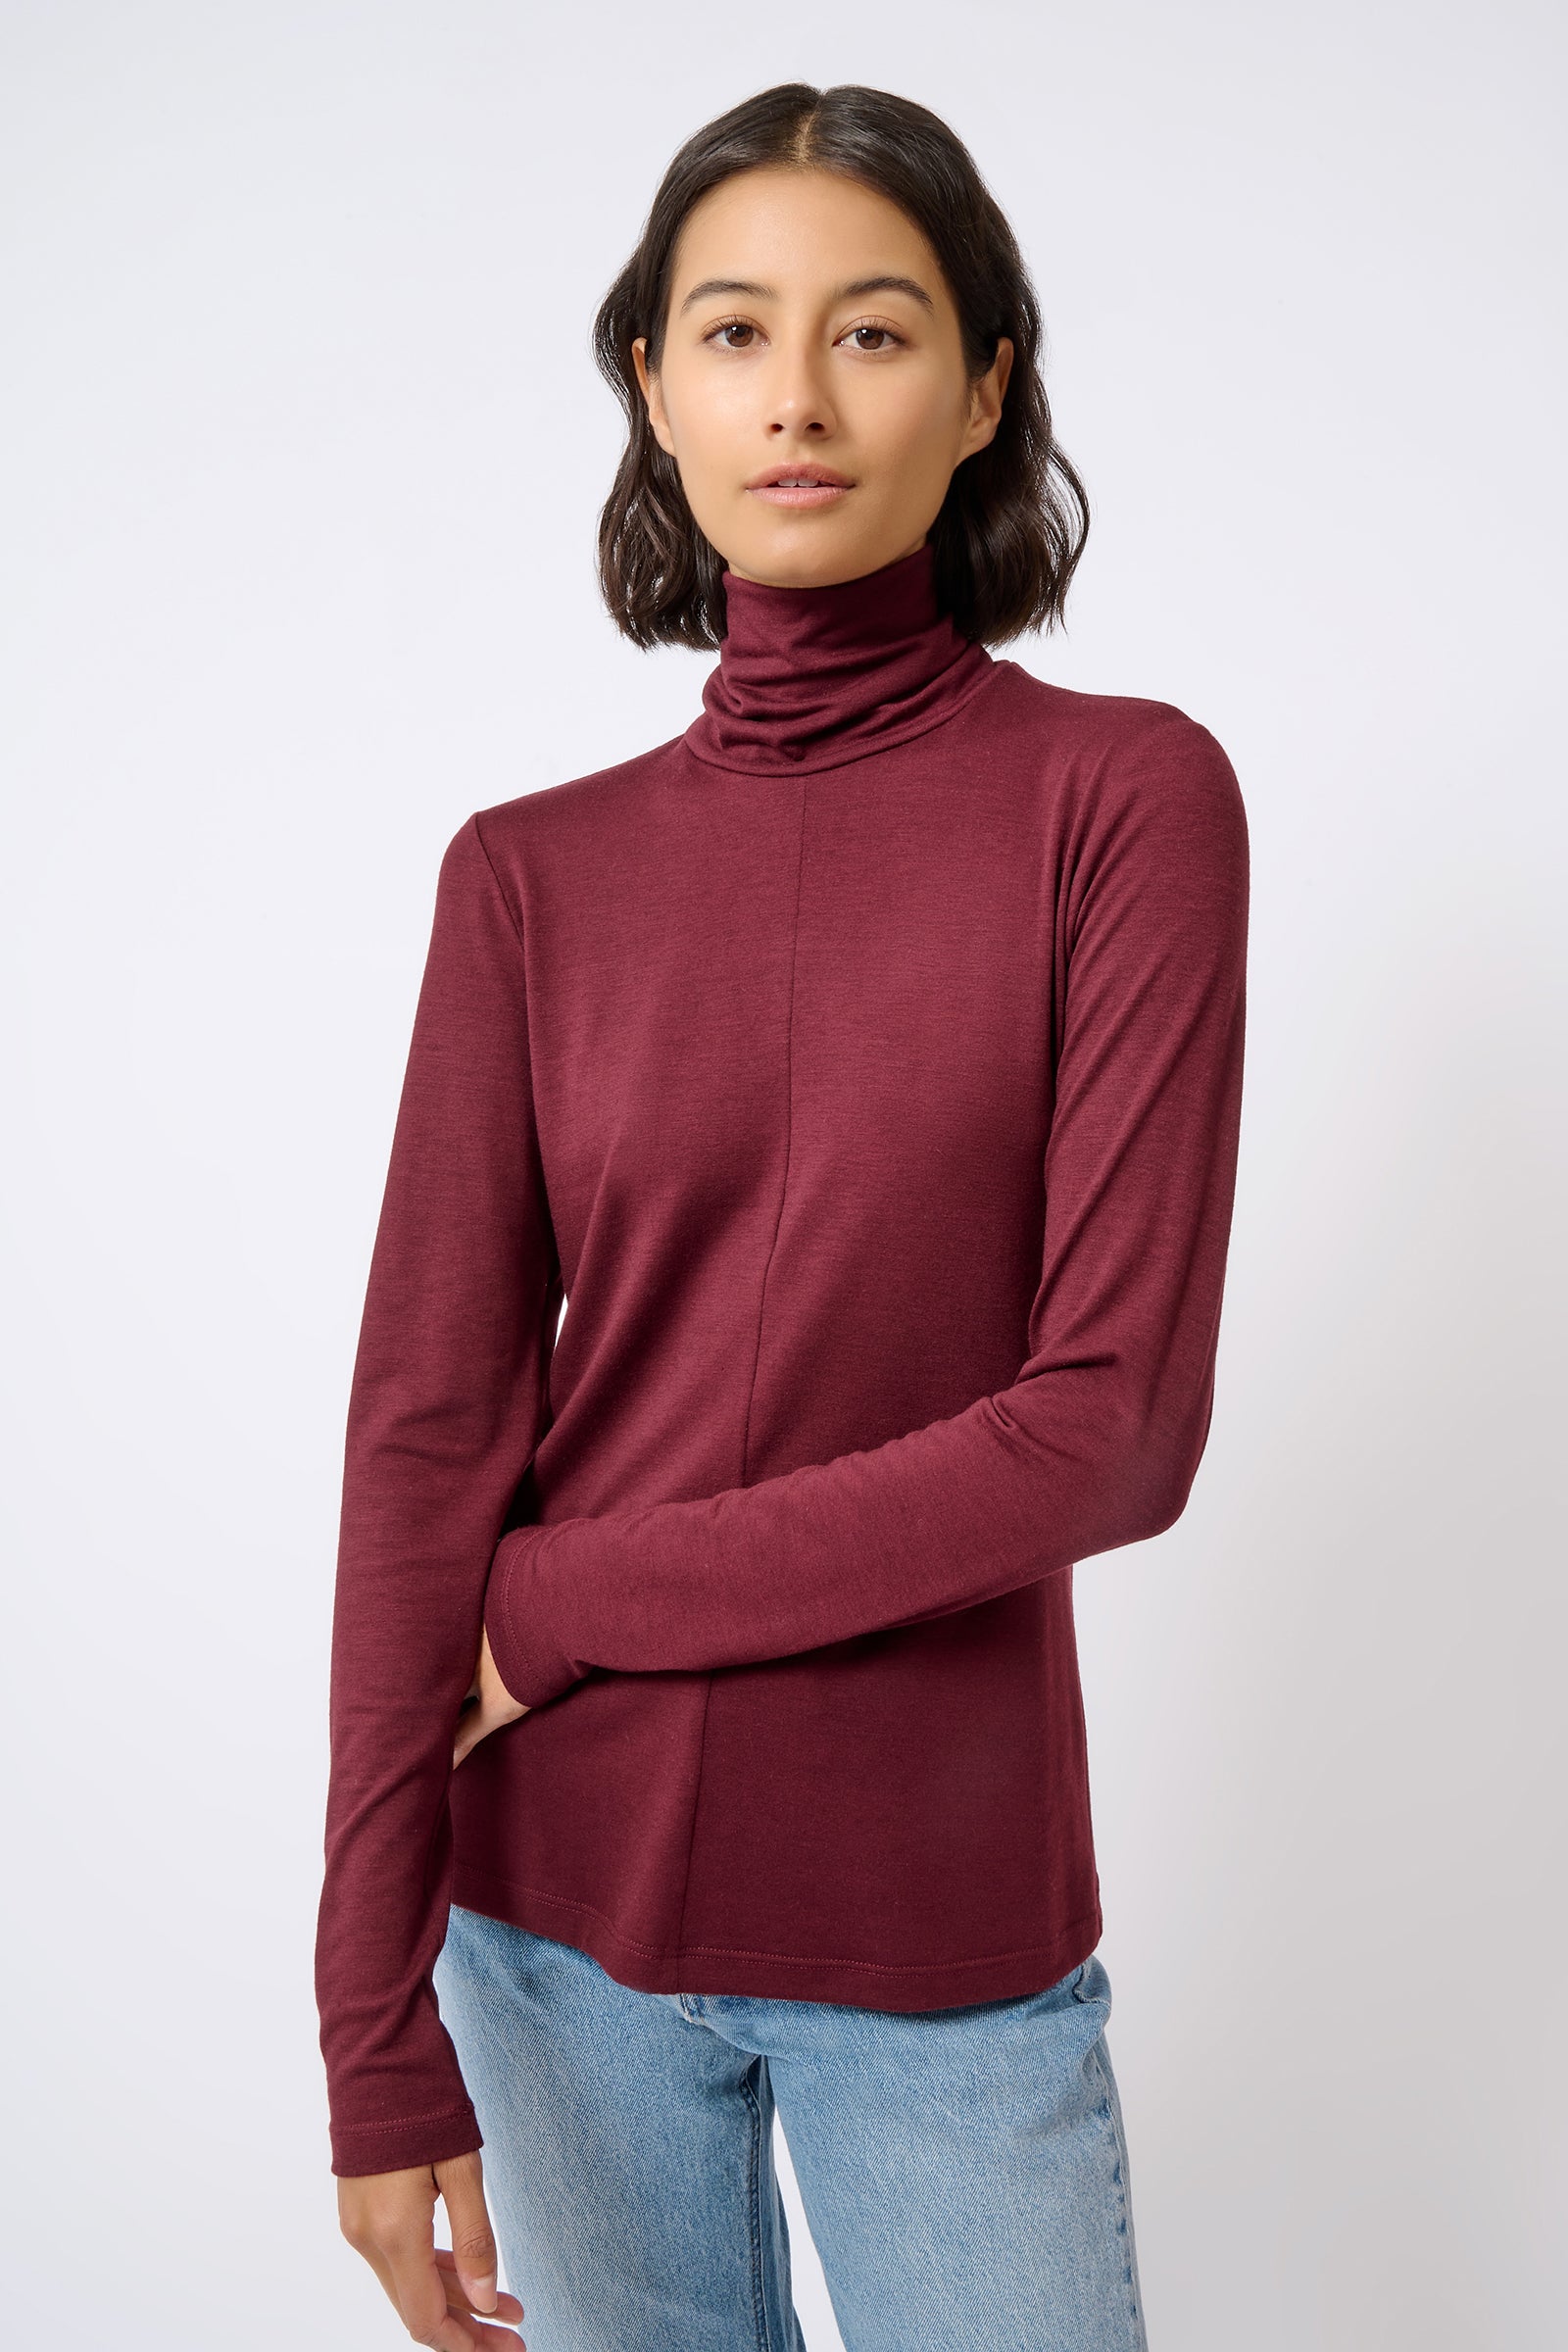 Kal Rieman Seamed Fitted Turtleneck in Wine Color on Model Front View